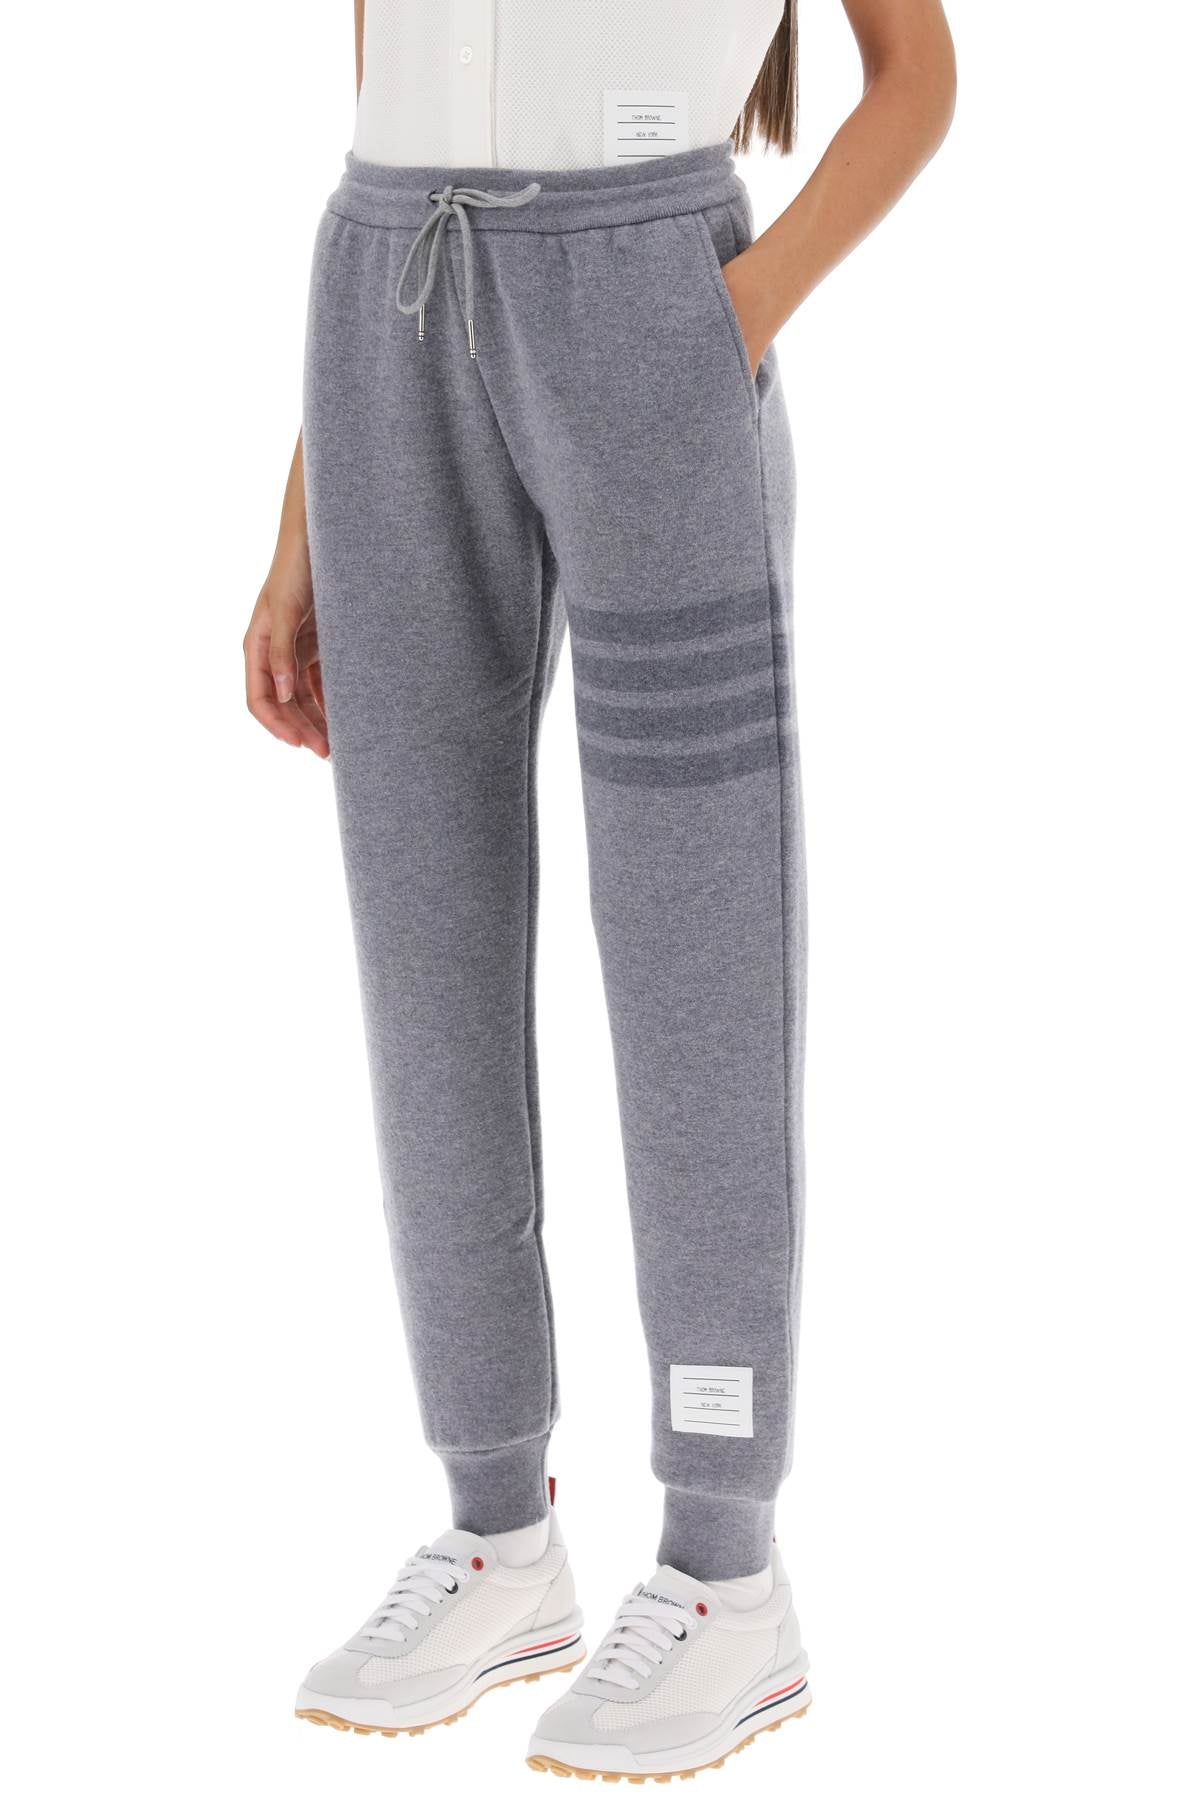 Thom browne knitted joggers with 4-bar motif-3